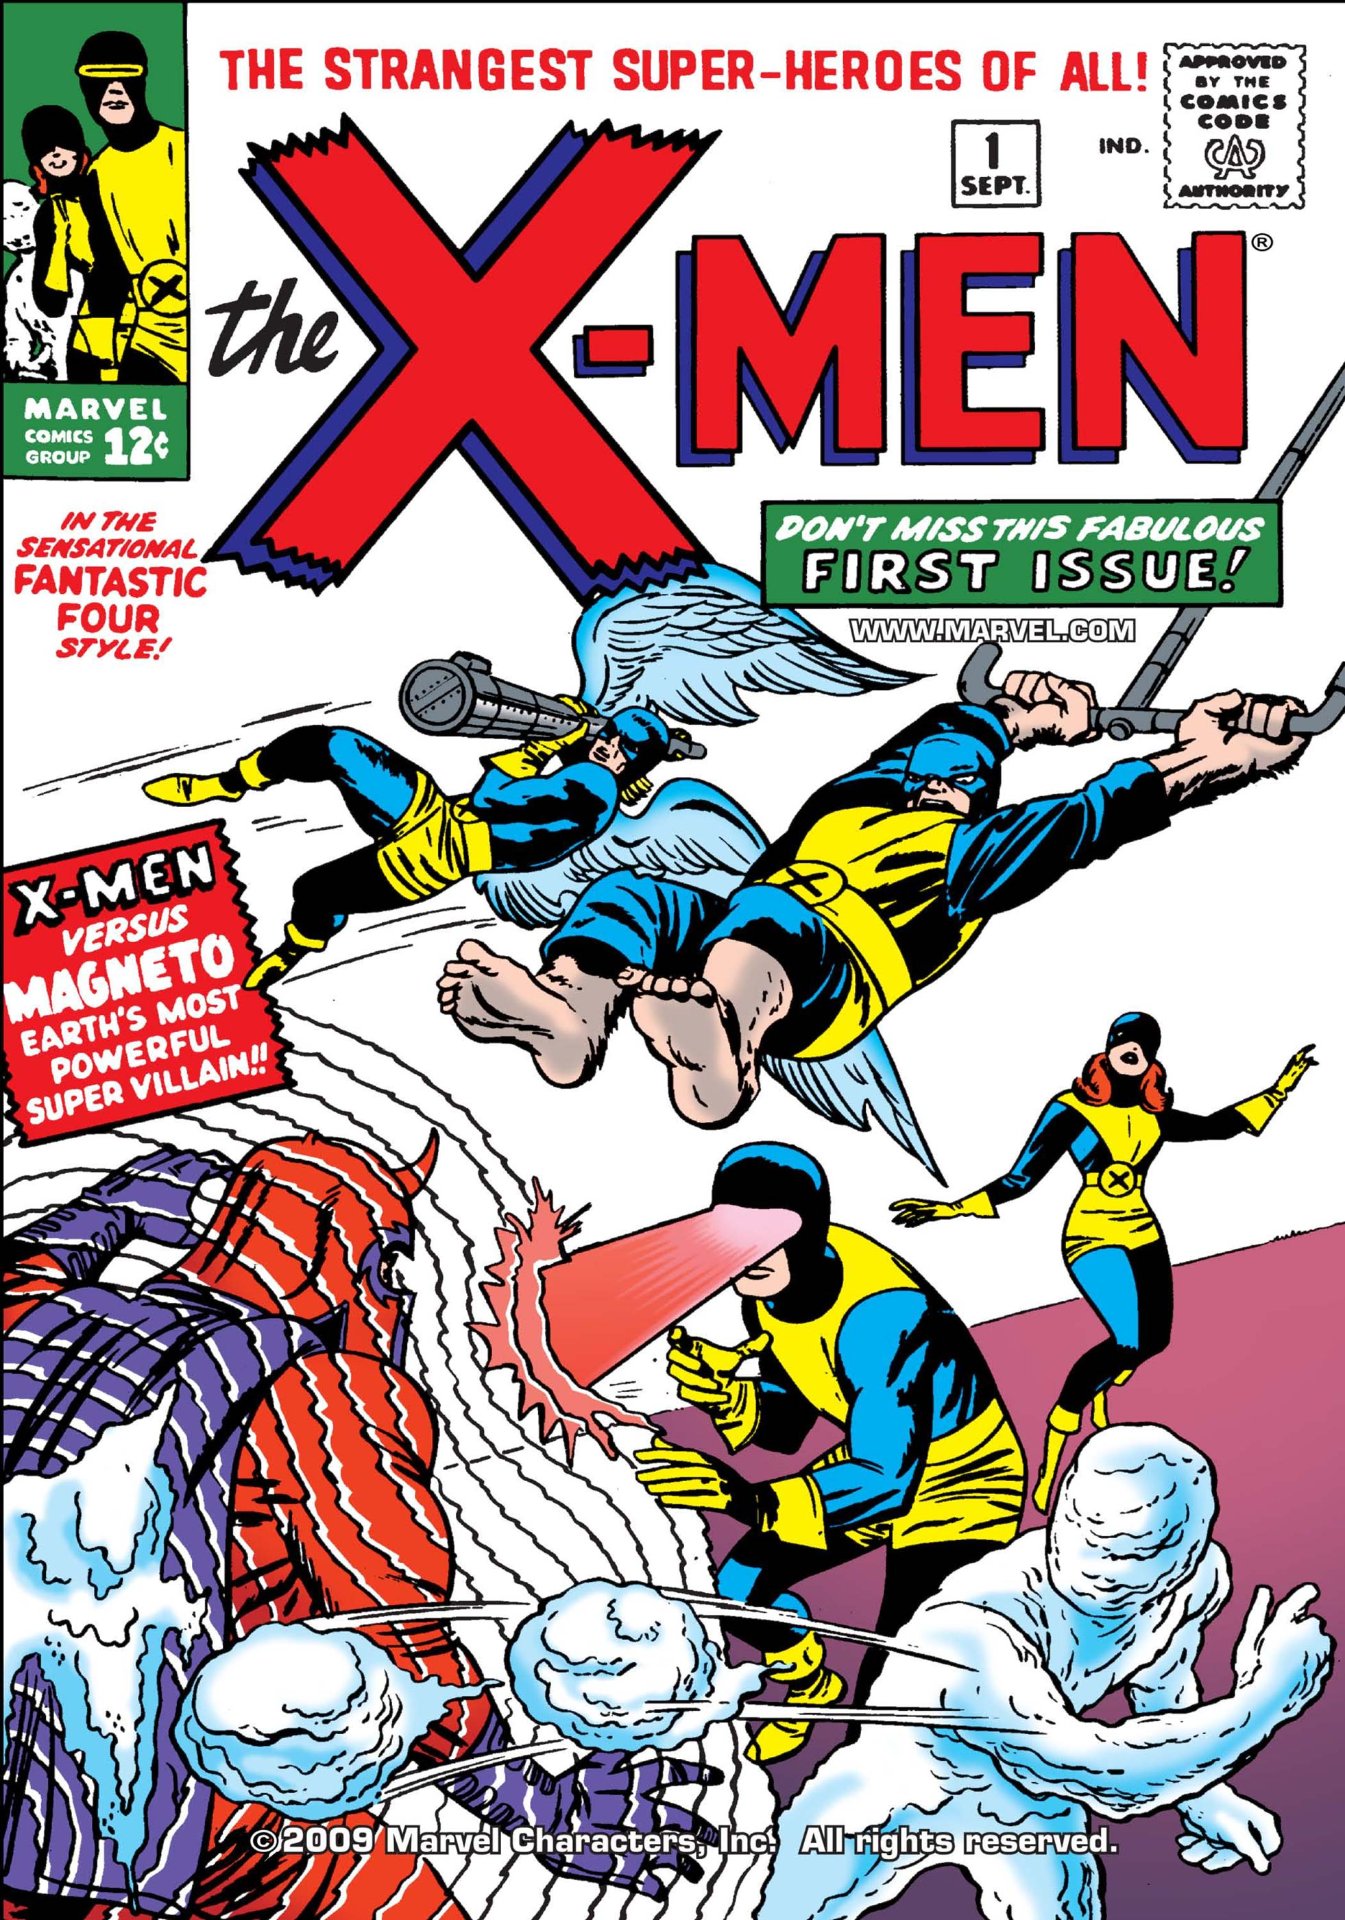 Jack Kirby's 1963 X-Men #1 cover